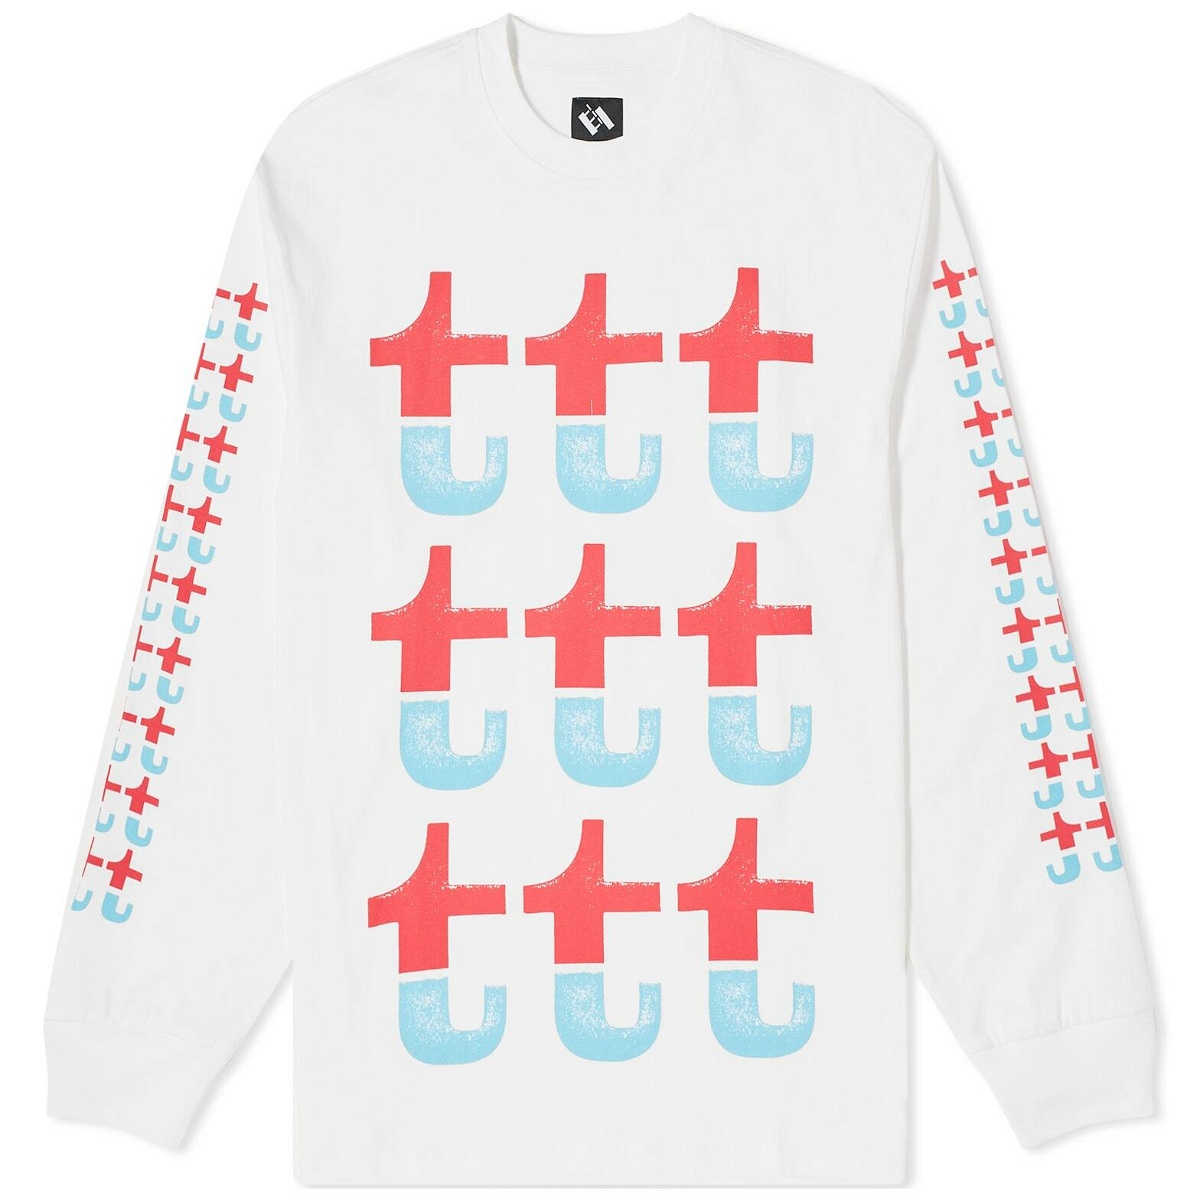 Photo: The Trilogy Tapes Men's Split Long Sleeve T-Shirt in Red/Blue